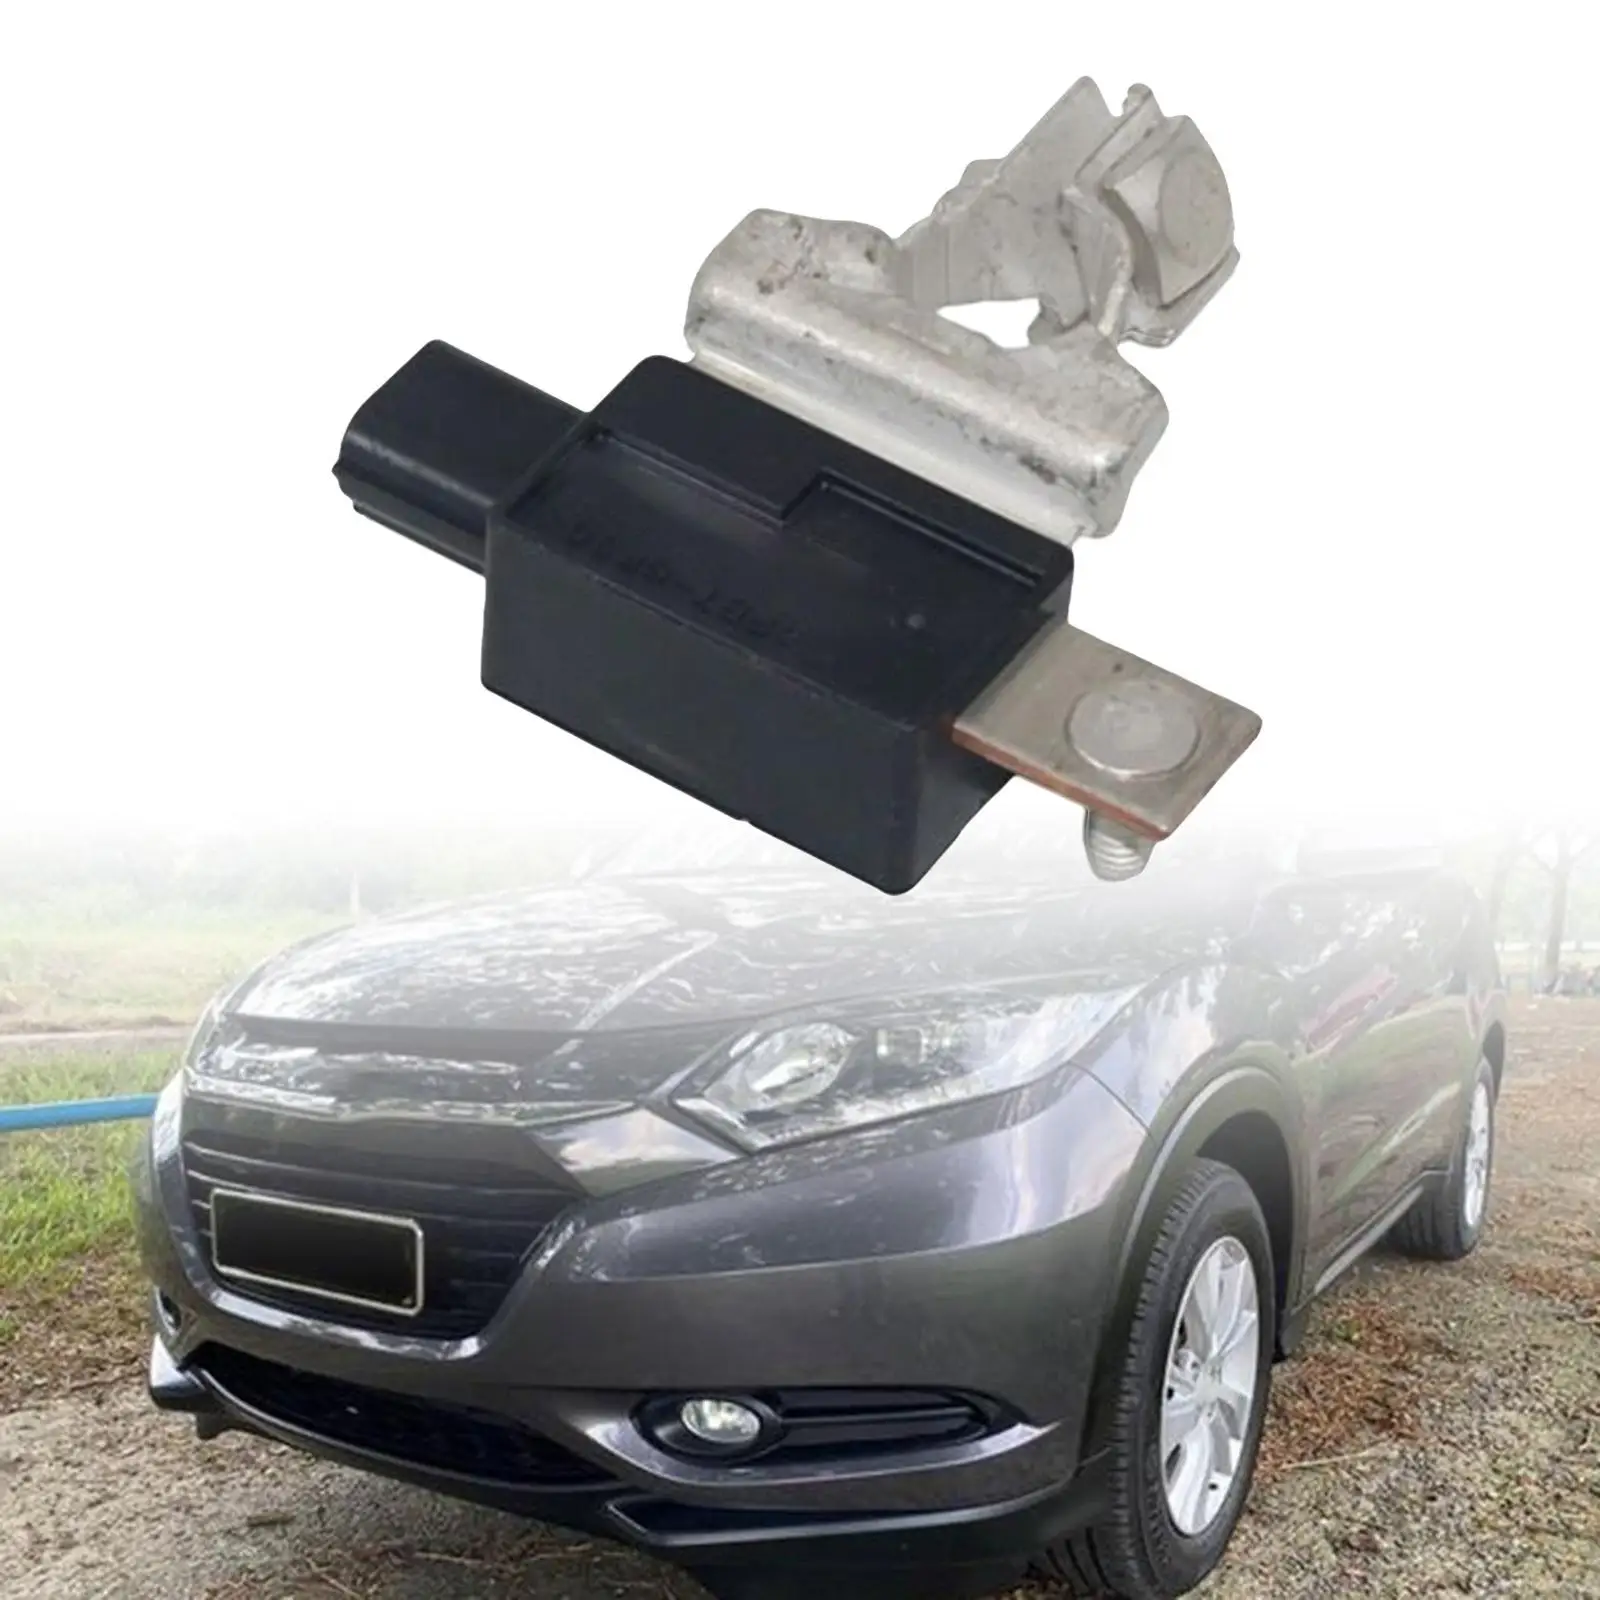 Auto Battery Current Sensor 38920-T5A-A01 Accessories Easy to Install High Performance 3 Pins for Honda Fit 2015-2017